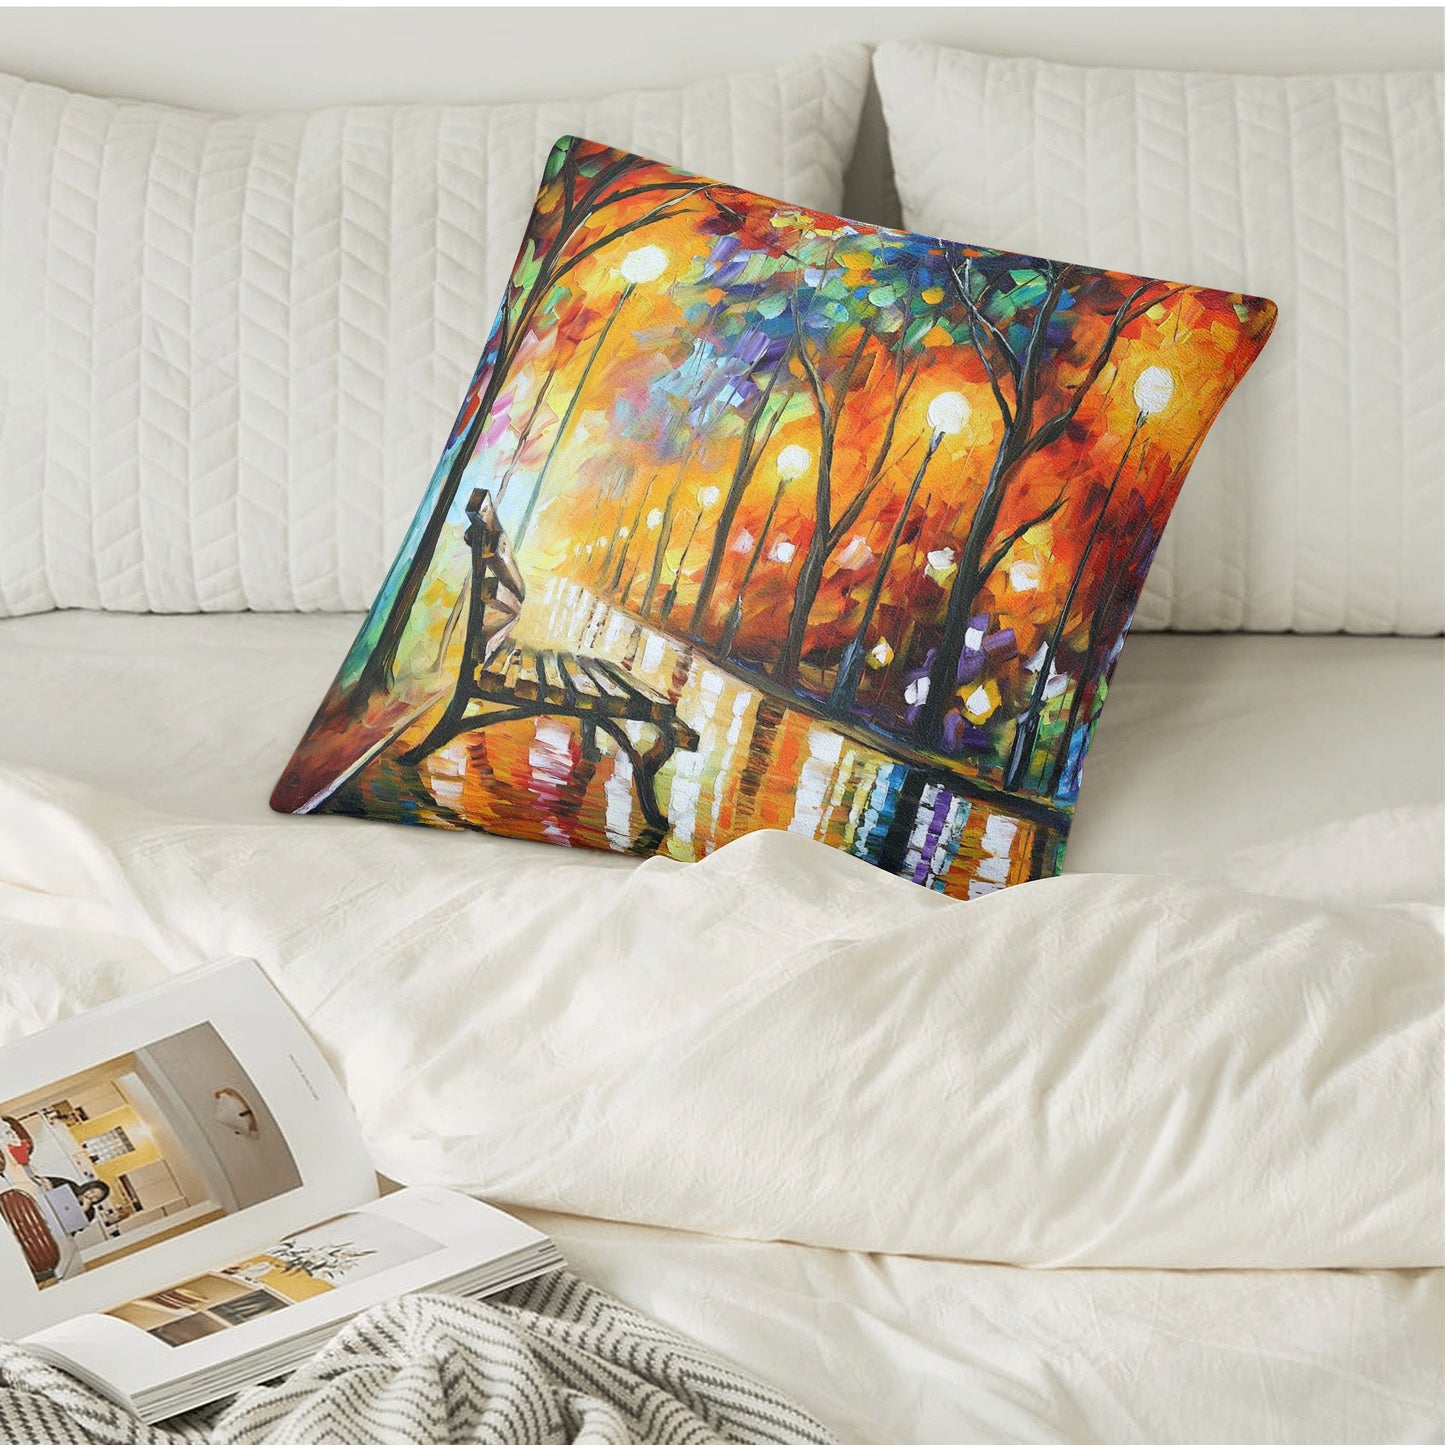 Double Side Printing Pillow Cover Afremov THE LONELINESS OF AUTUMN